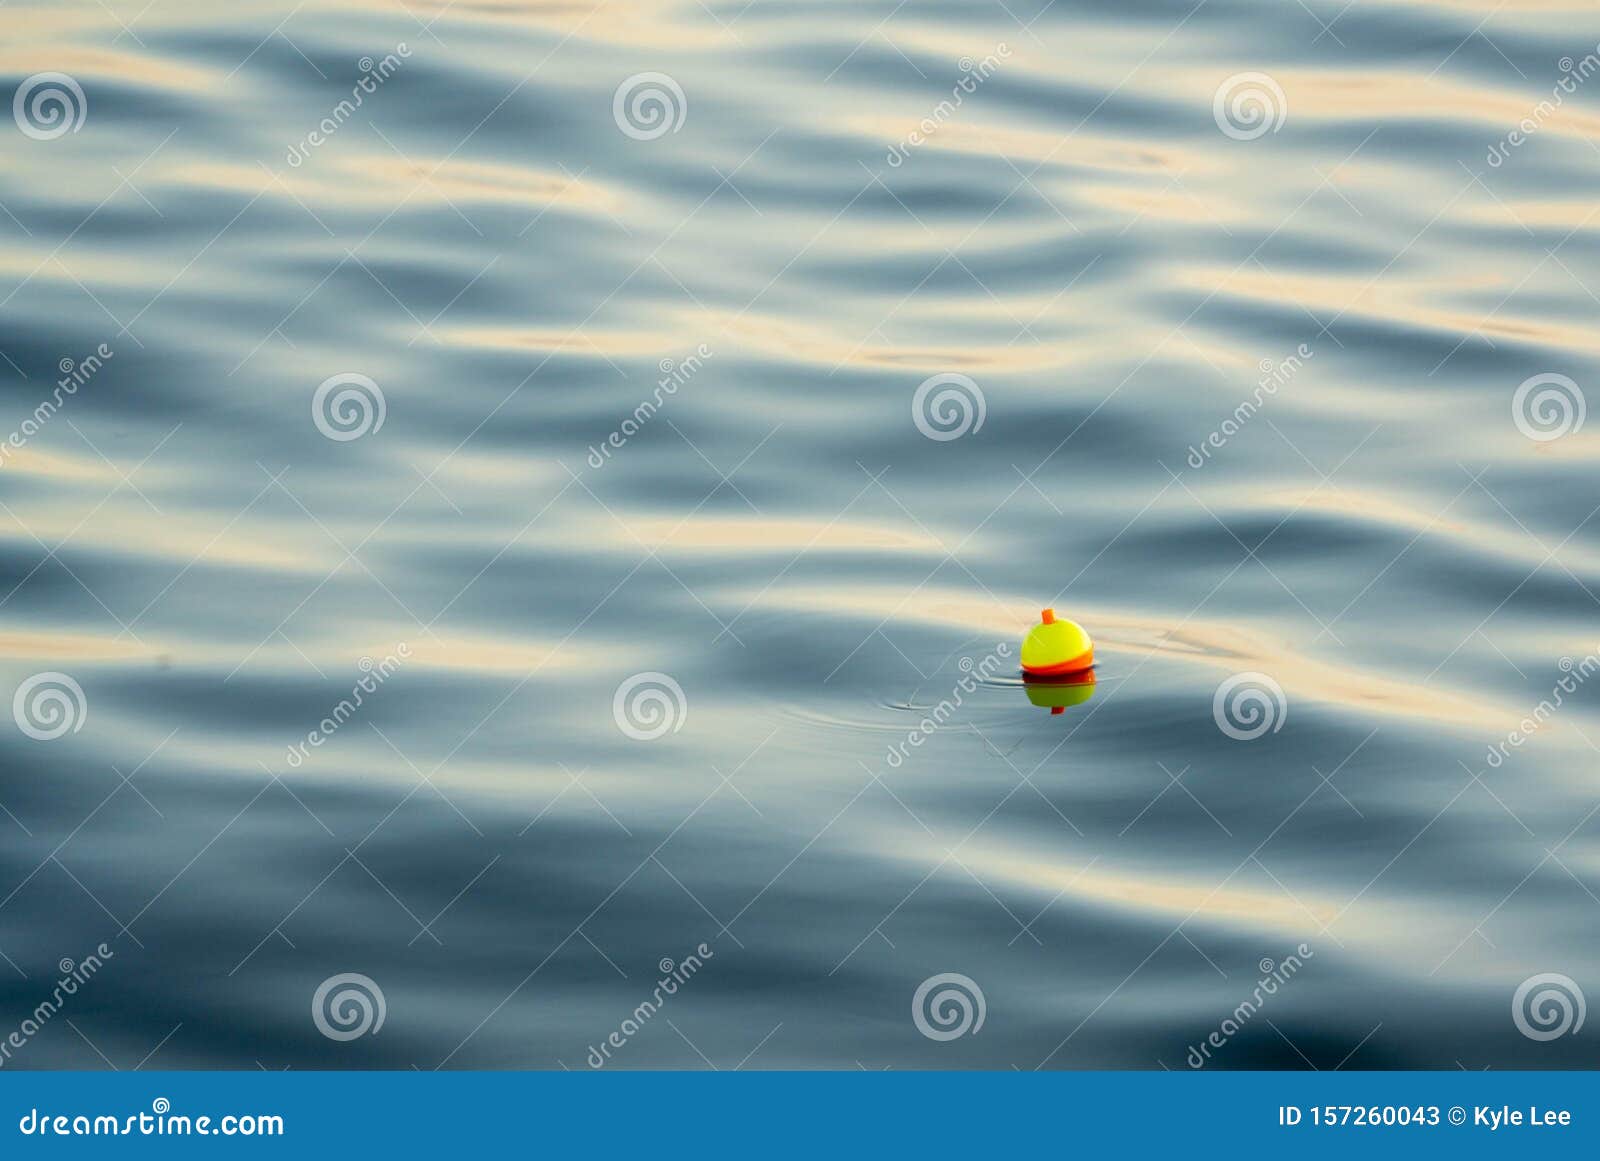 https://thumbs.dreamstime.com/z/fishing-bobber-water-fishing-bobber-water-late-afternoon-room-copy-157260043.jpg